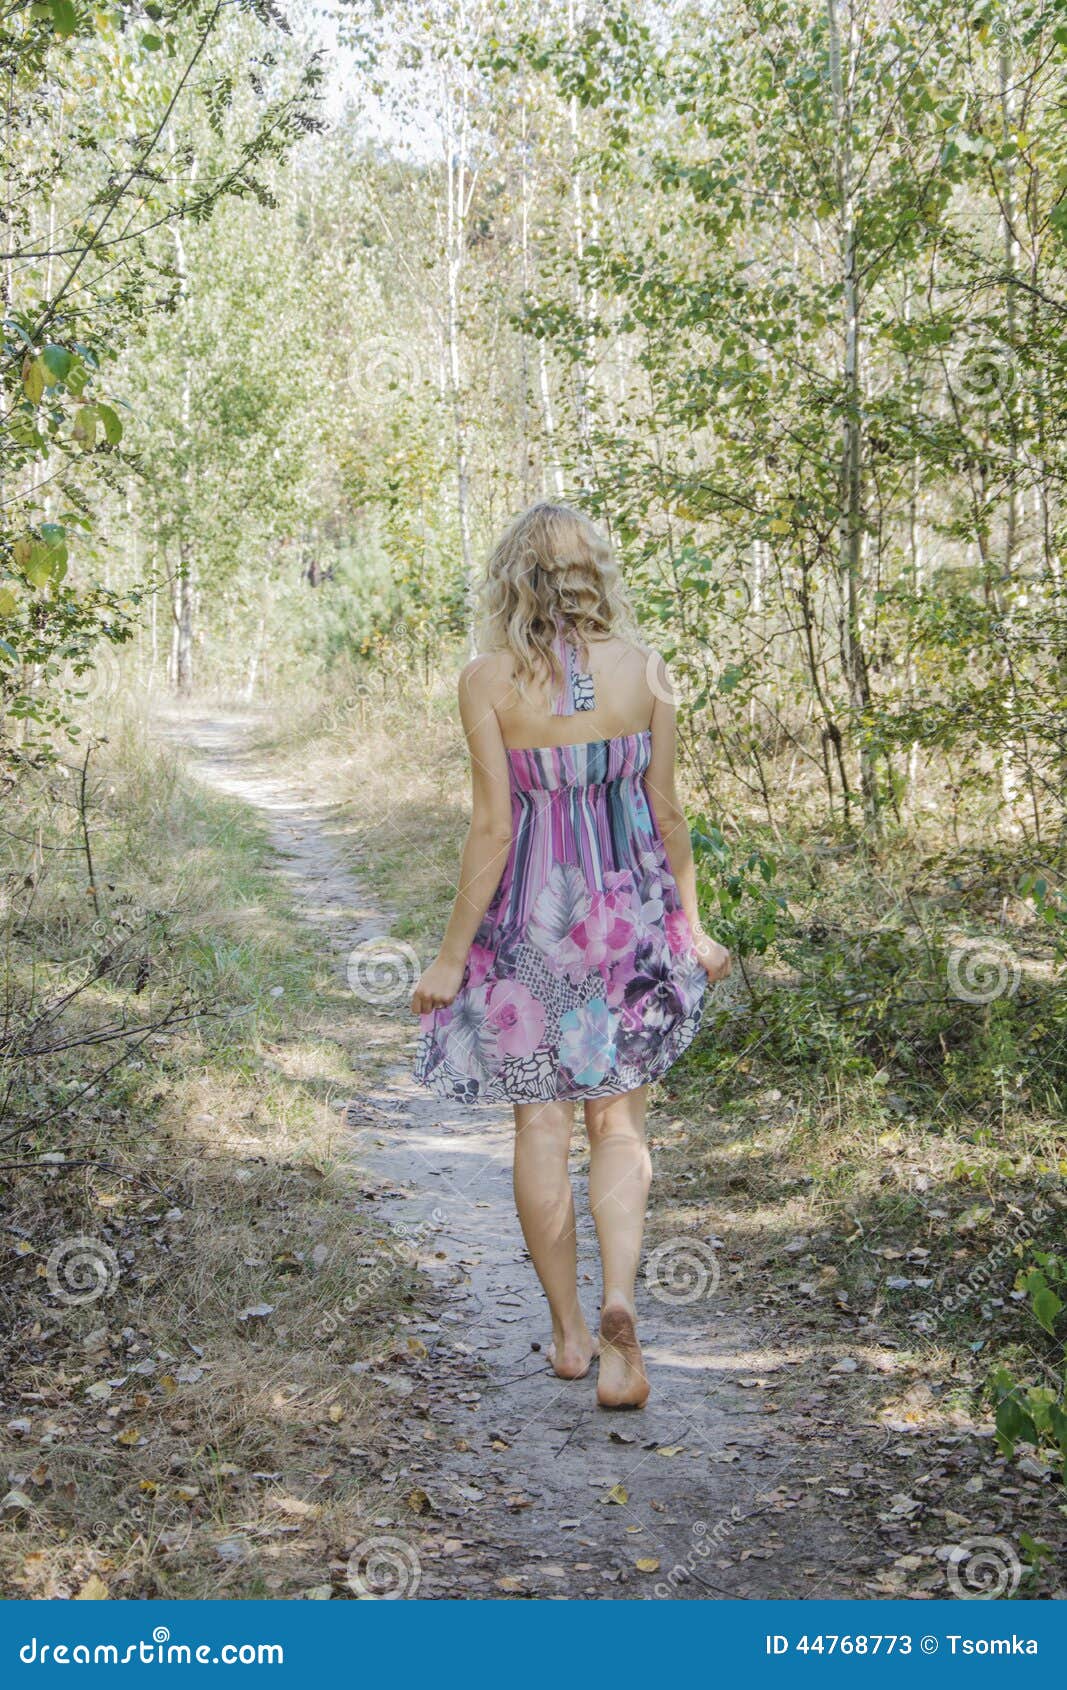 Barefoot Woman Walking Through The Forest Stock Image Image Of Enjoyment Journey 44768773 